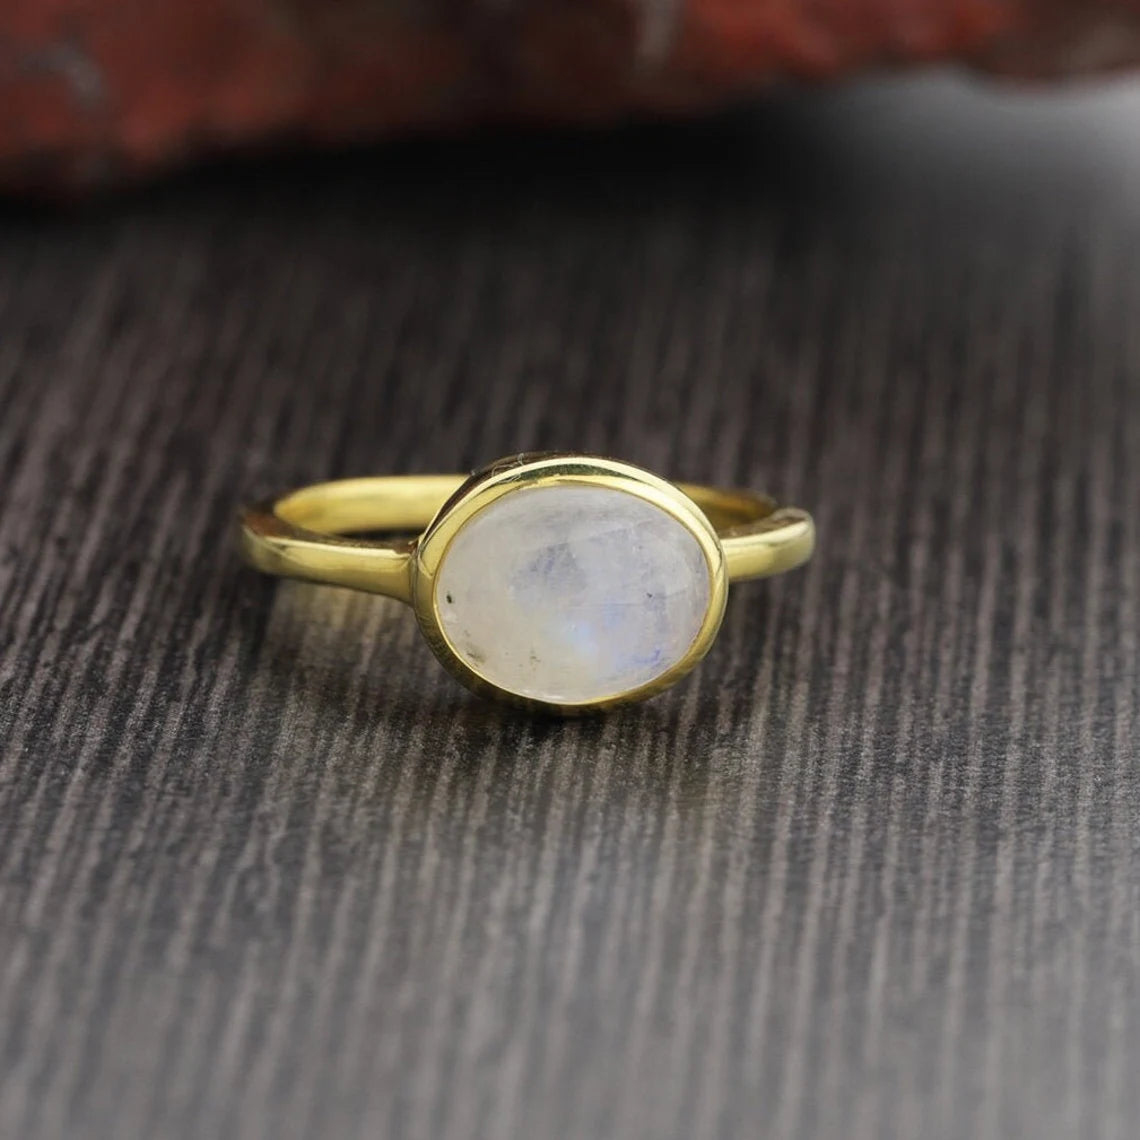 Rainbow Moonstone Gold Plated Ring - Simple Moonstone Ring - June Birthstone Ring - Oval Moonstone Ring